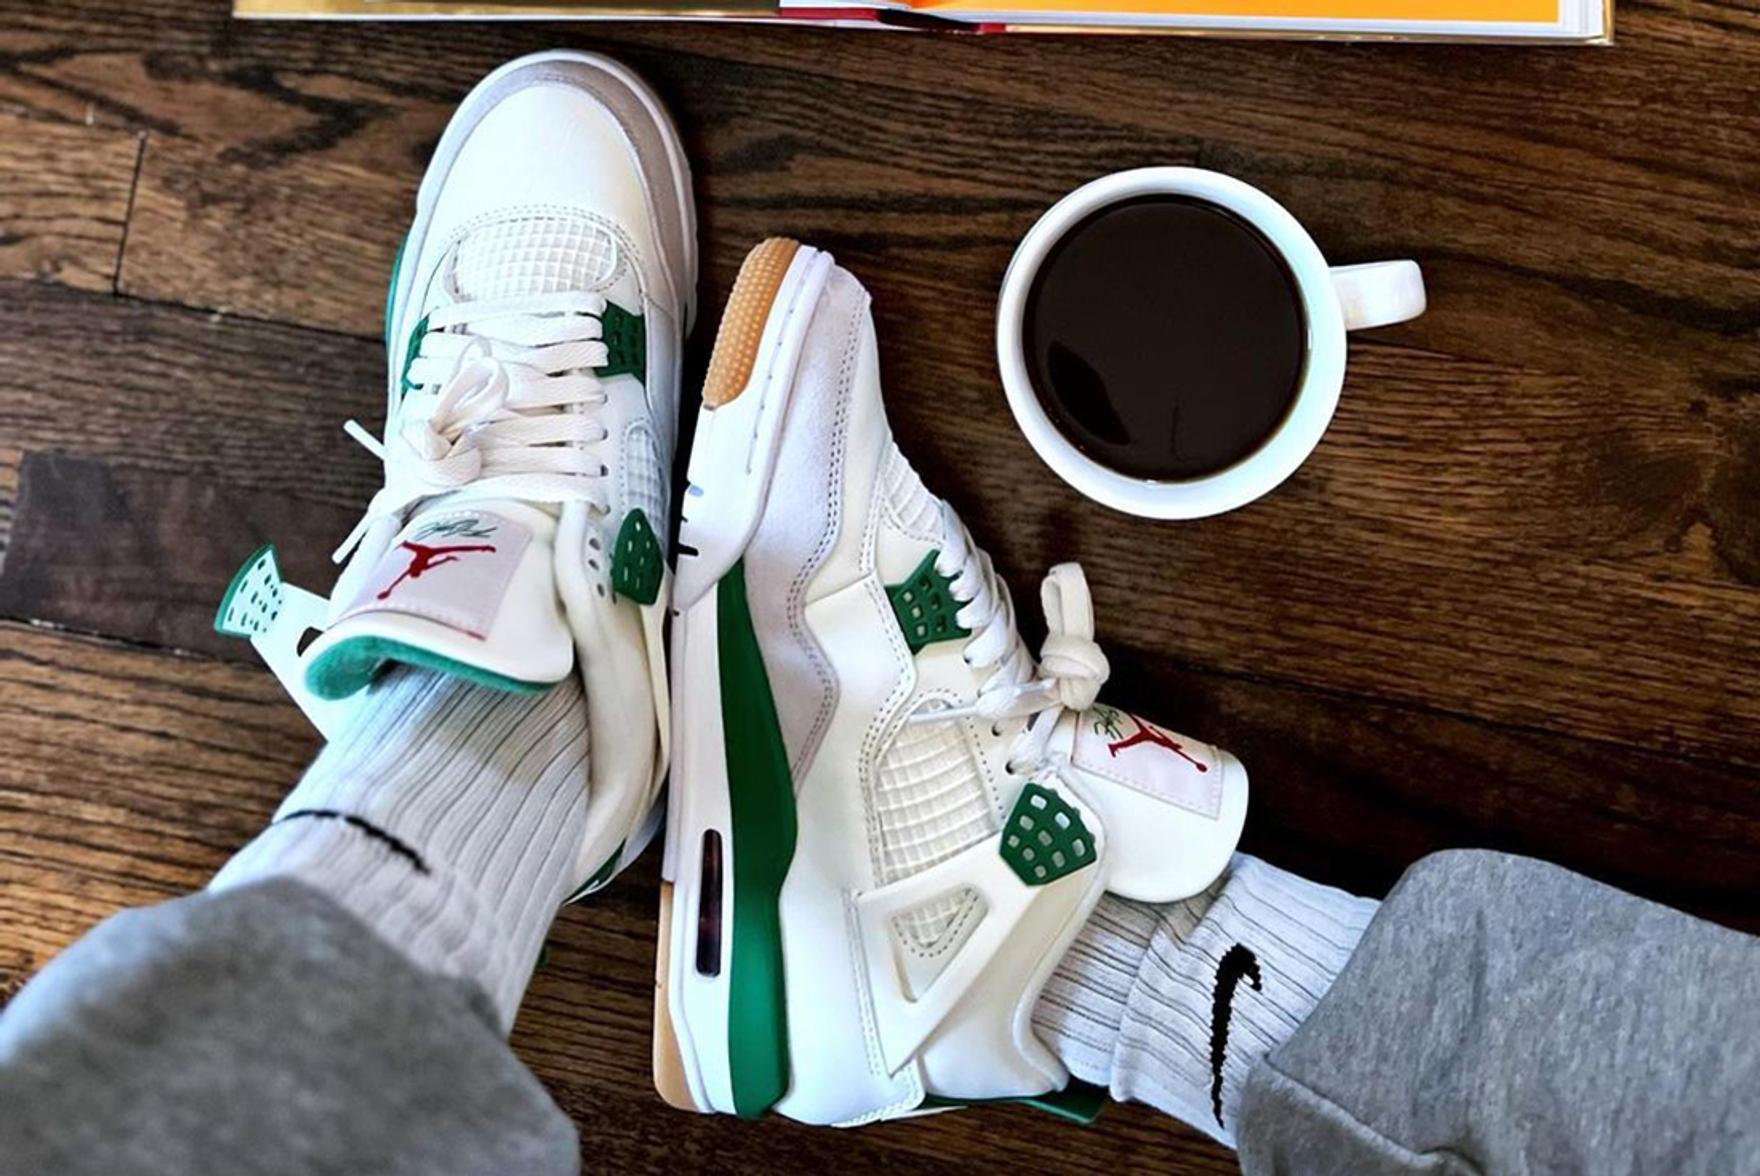 Here’s How People Are Styling the Nike SB x Air Jordan 4 ‘Pine Green’